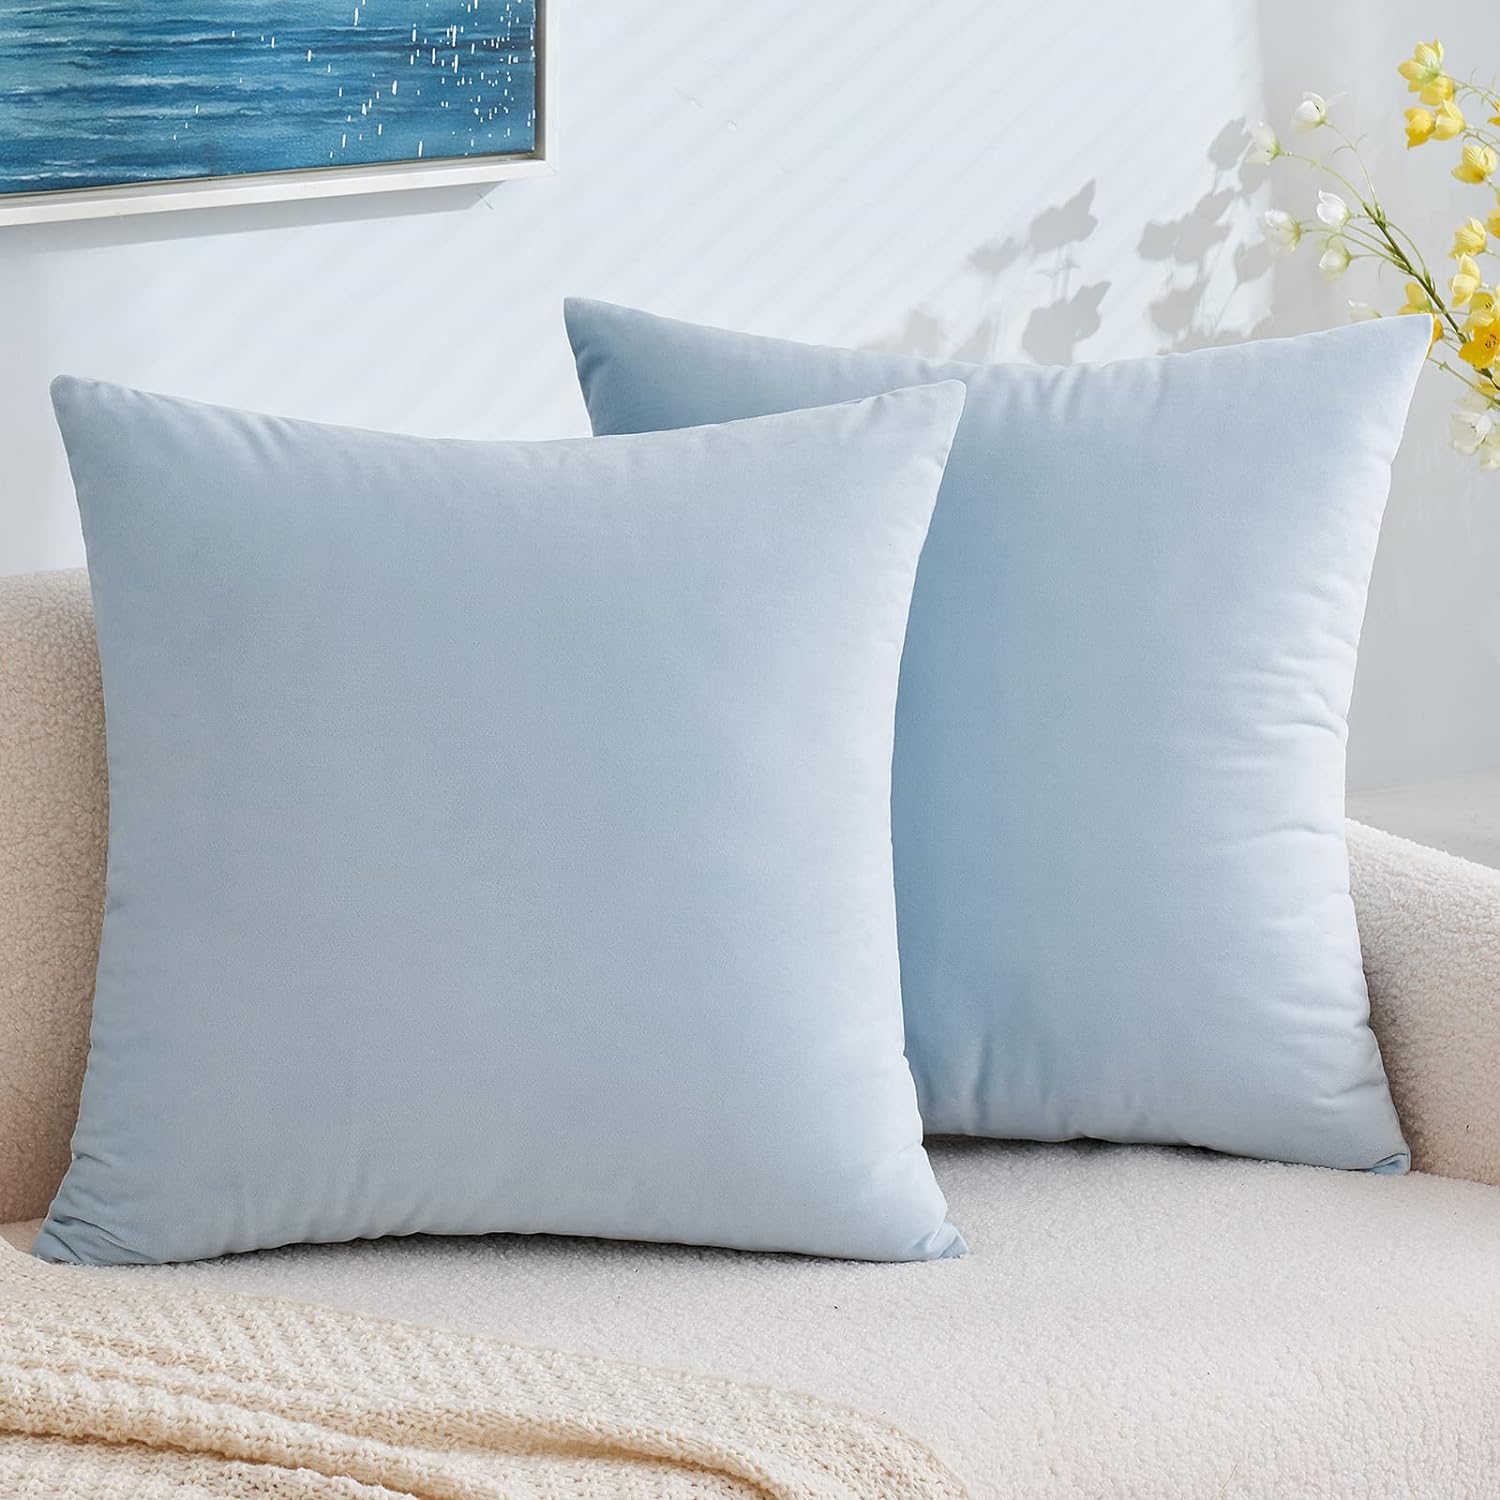 EMEMA Pack of 2 Velvet Pillow Covers Decorative Square Pillowcase Soft Solid Cushion Case for Sofa Bedroom Car 18x18 Inch Baby Blue